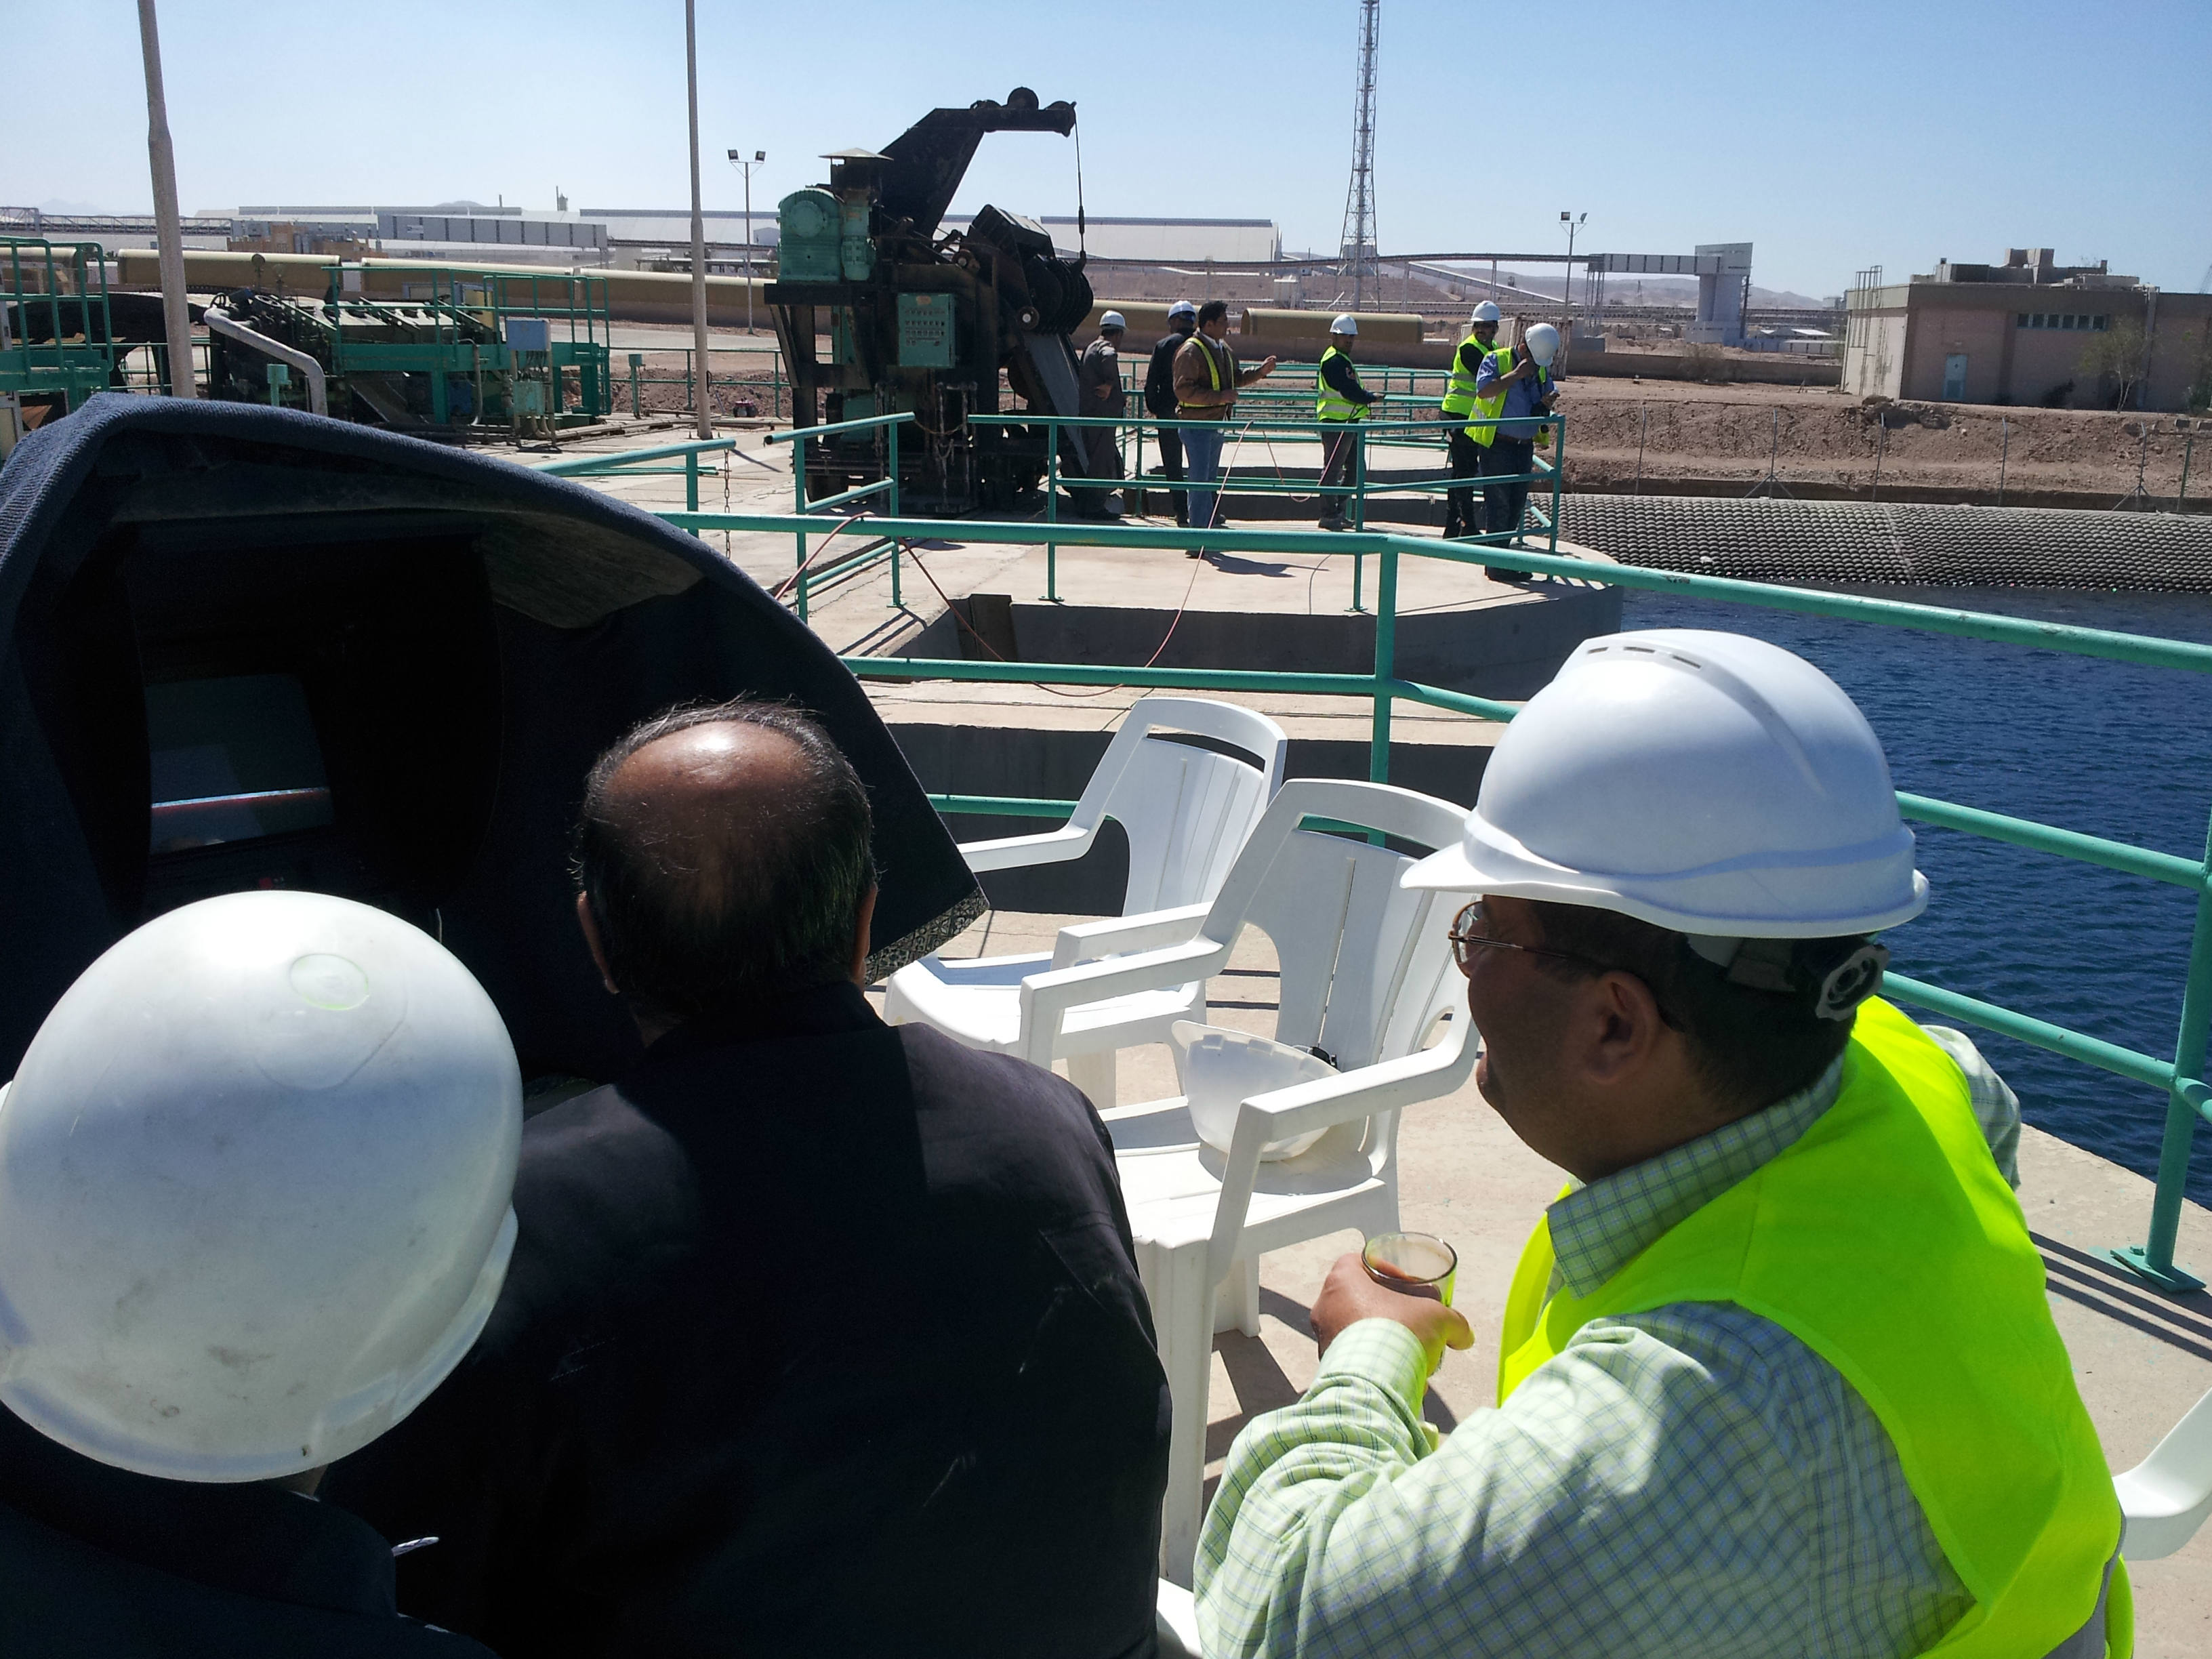 Viewing CCTV Screen During Inspection At Central Electric Generating Company, Jordan With ACES